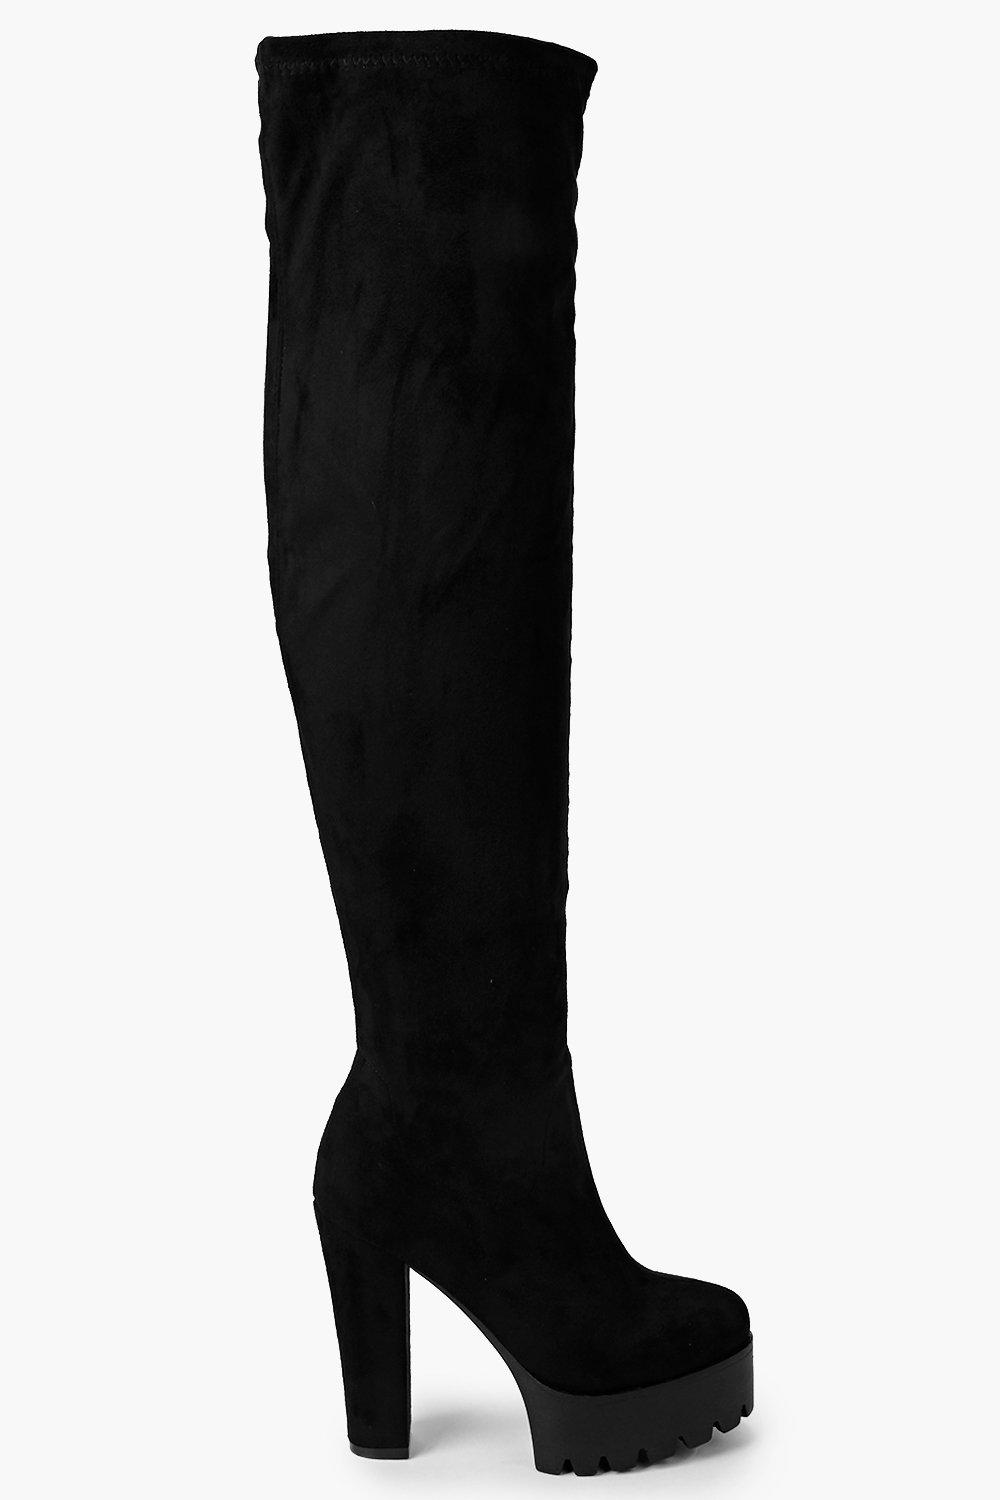 cleated thigh high boots